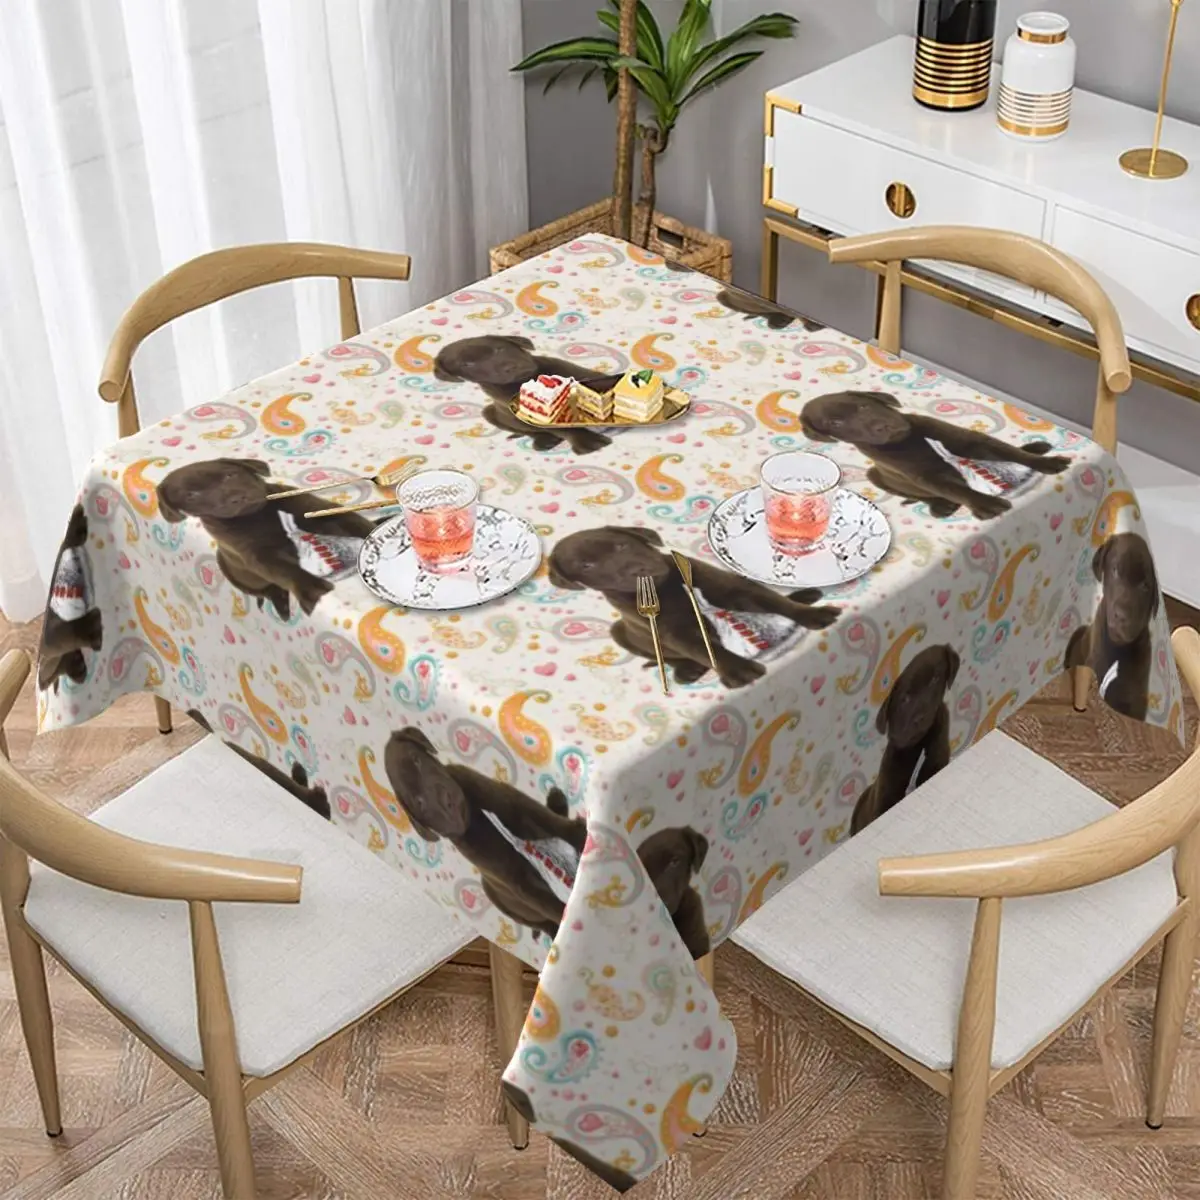 

Puppy Chocolate Lab Kisses Table Cover Universal Rectangular Fitted Tablecloth Protector for Wedding Banquet Party